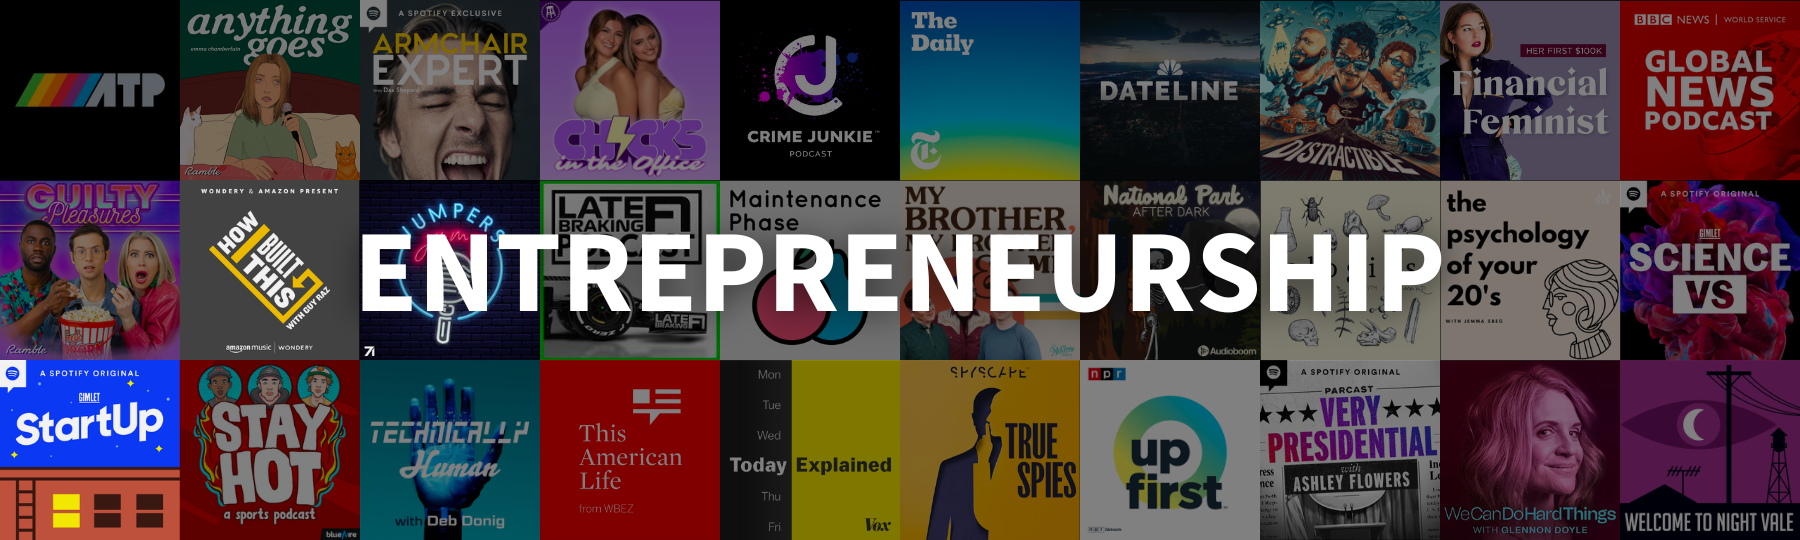 A graphic that says "Entrepreneurship" with a collage of podcast covers in the back.